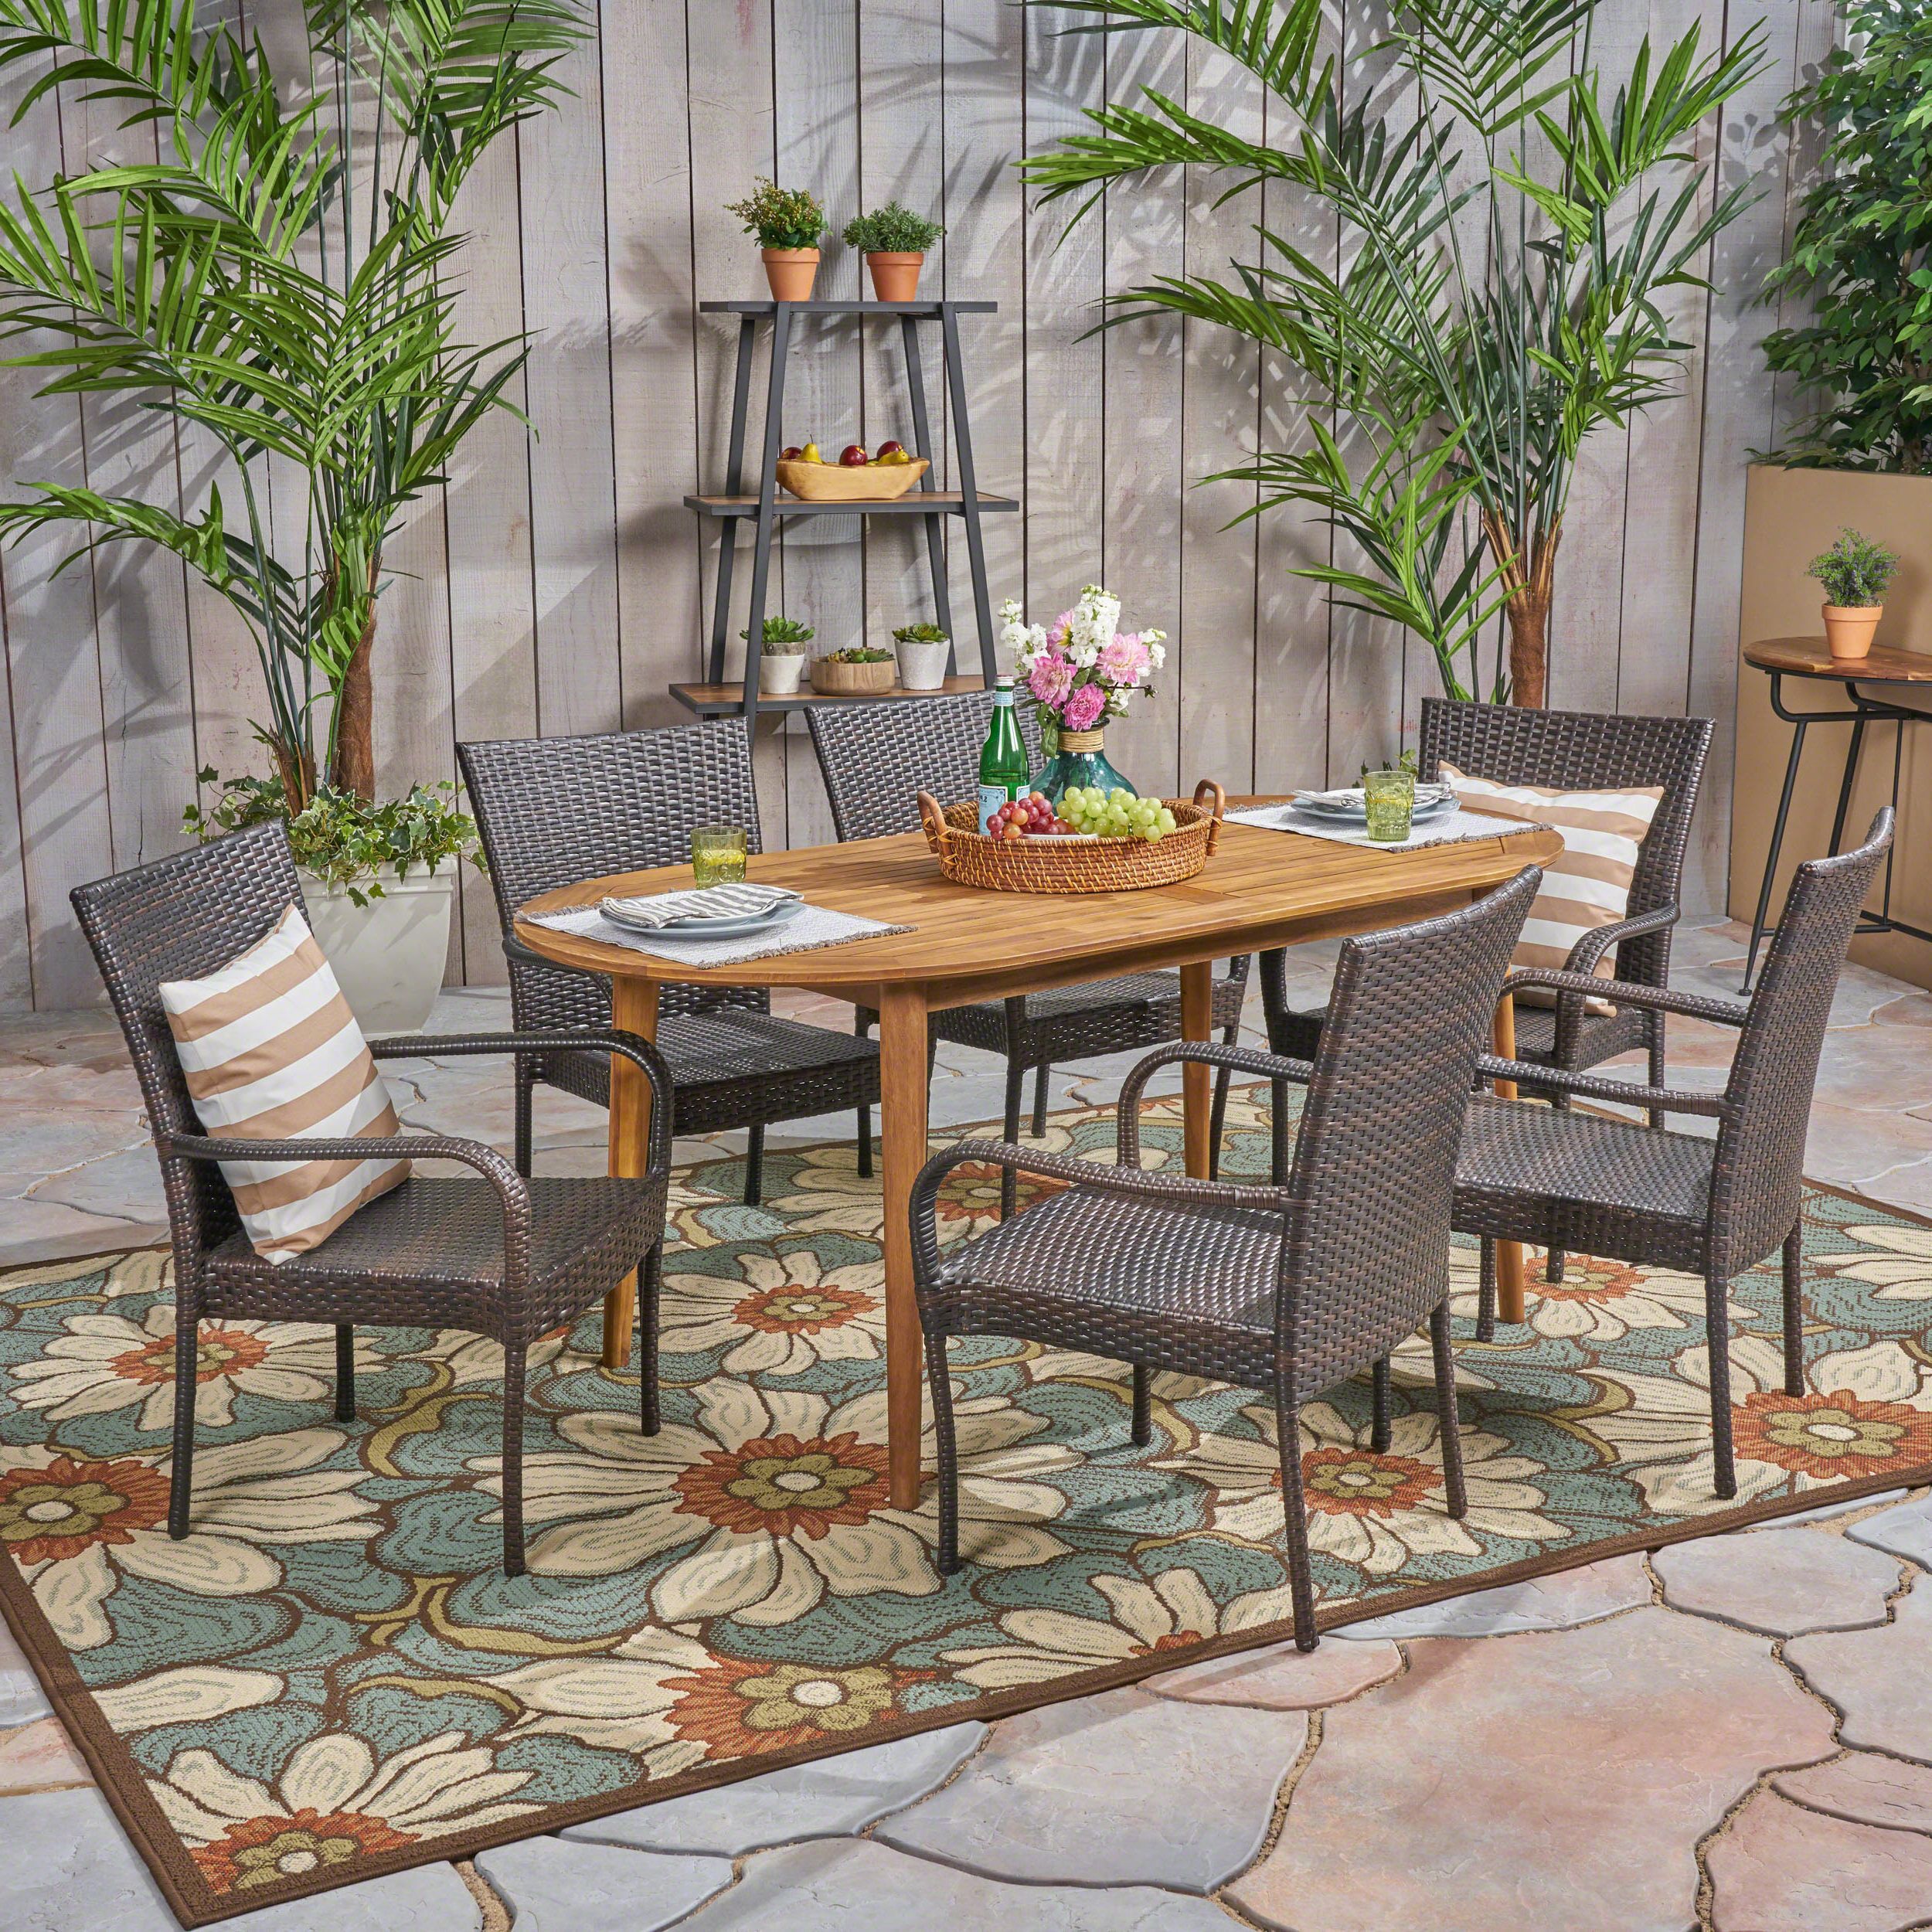 Jennifer Outdoor 7 Piece Acacia Wood Dining Set With Stacking Wicker Intended For Most Current Teak Wicker Outdoor Dining Sets (View 12 of 15)